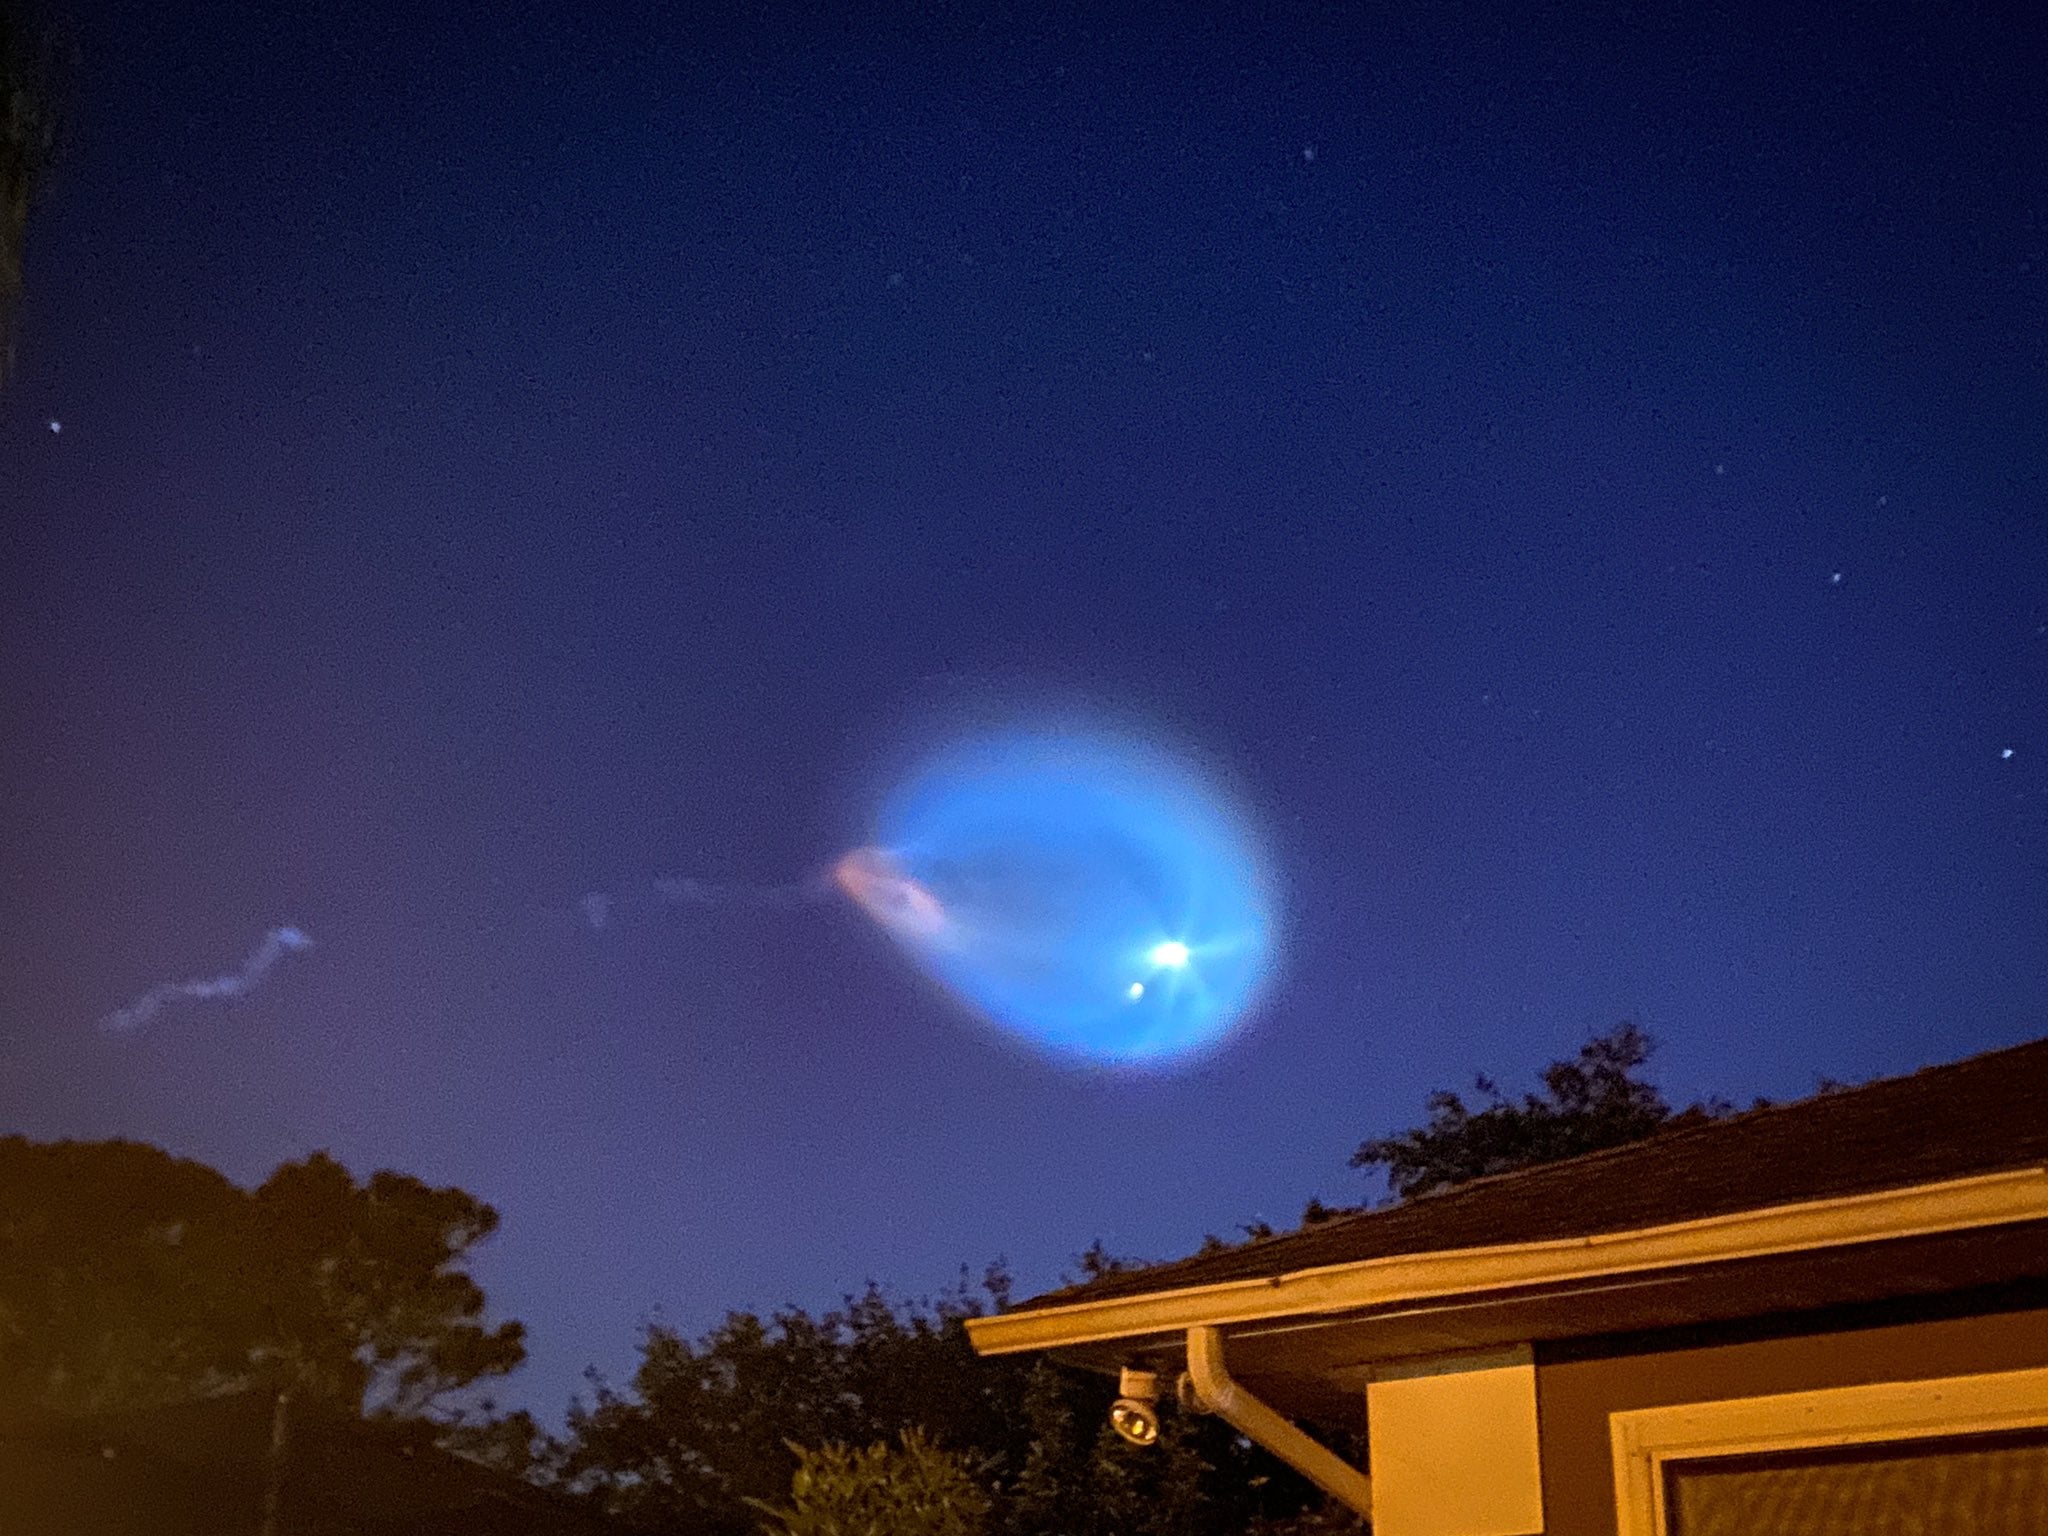 Watch the Falcon 9 Rocket Leave a Trail of Glowing Clouds in the Sky